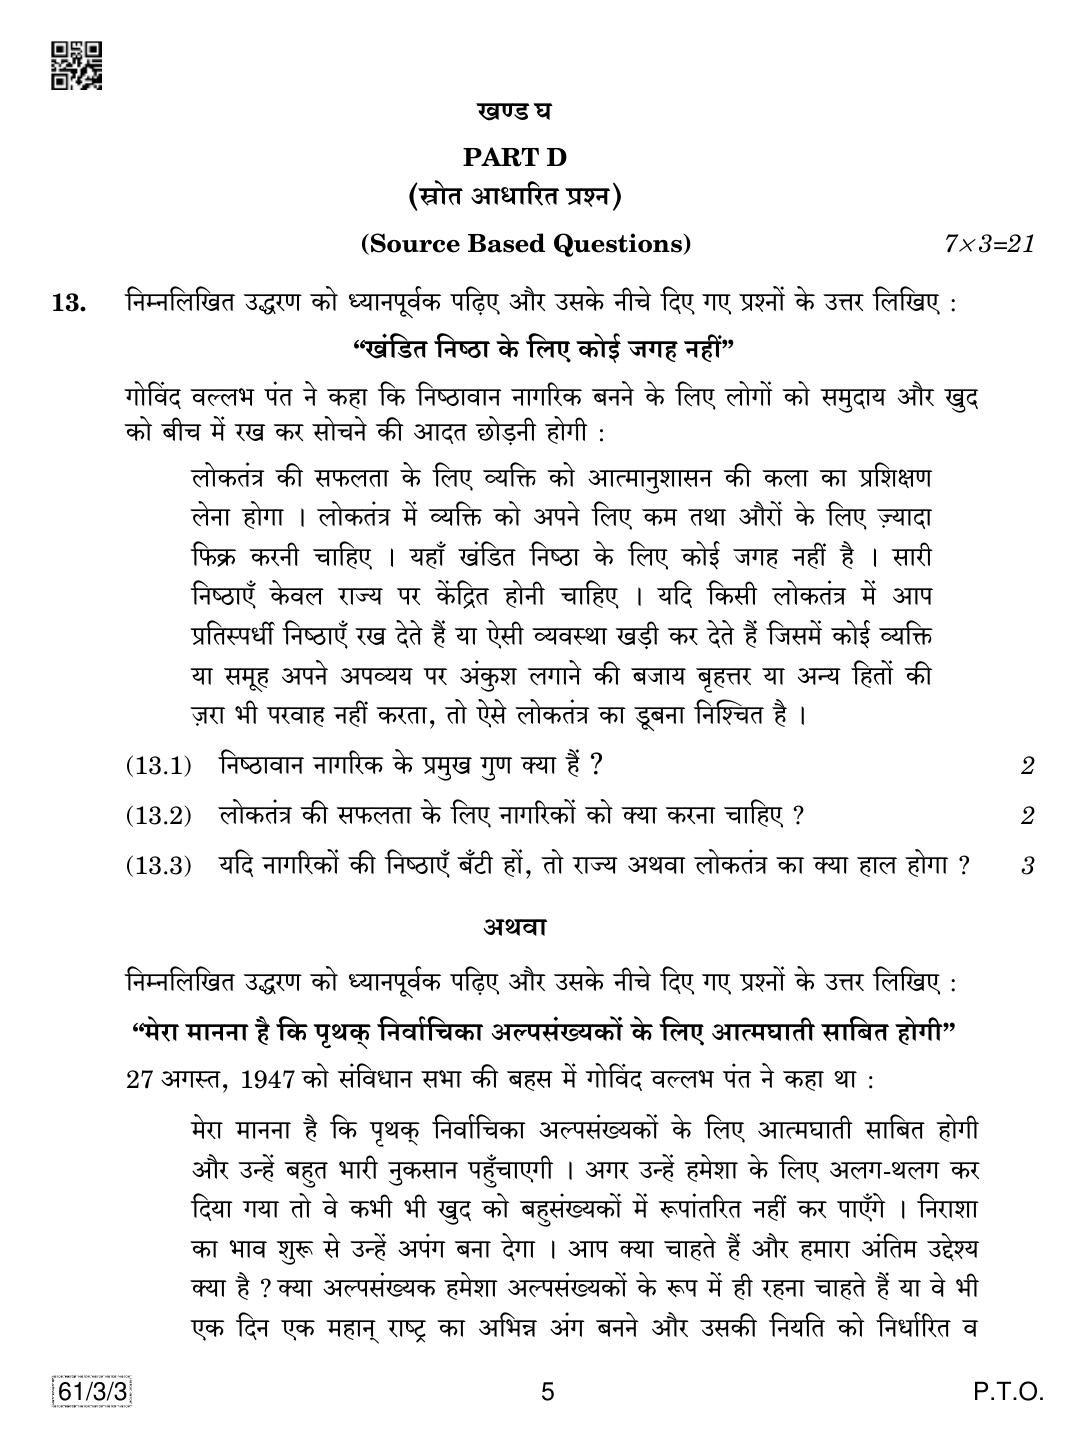 CBSE Class 12 61-3-3 History 2019 Question Paper - Page 5